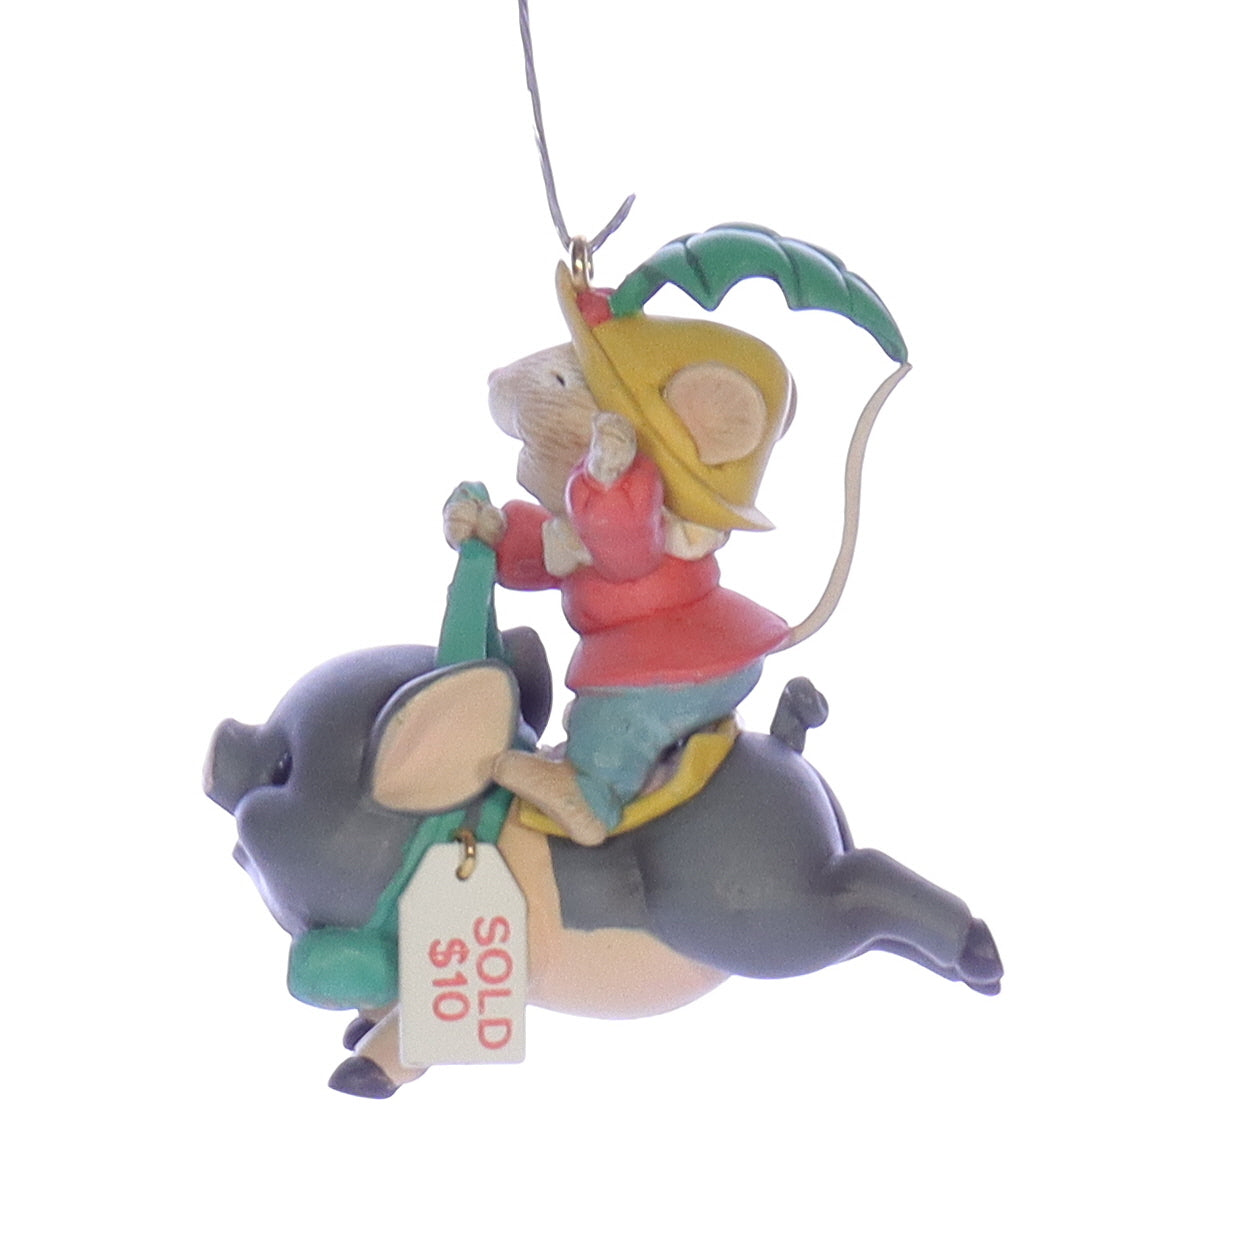 Enesco_Treasury_of_Christmas_Ornaments_575690_Tom_Tom_the_Pipers_Son_Christmas_Ornament_1992 Front View